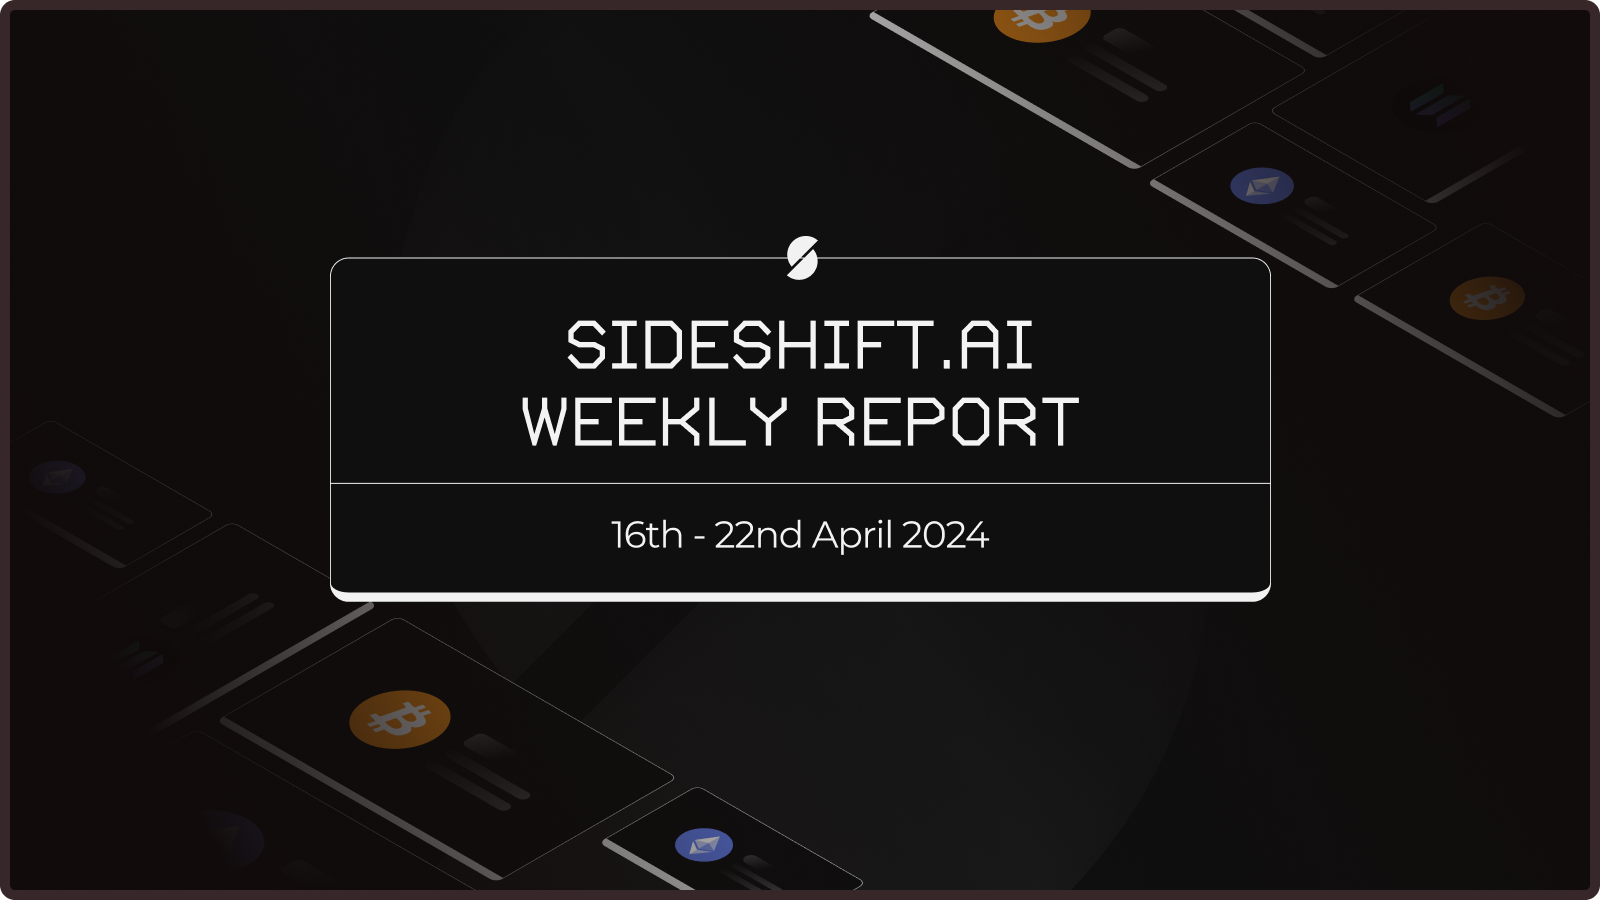 SideShift.ai Weekly Report | 16th - 22nd April 2024